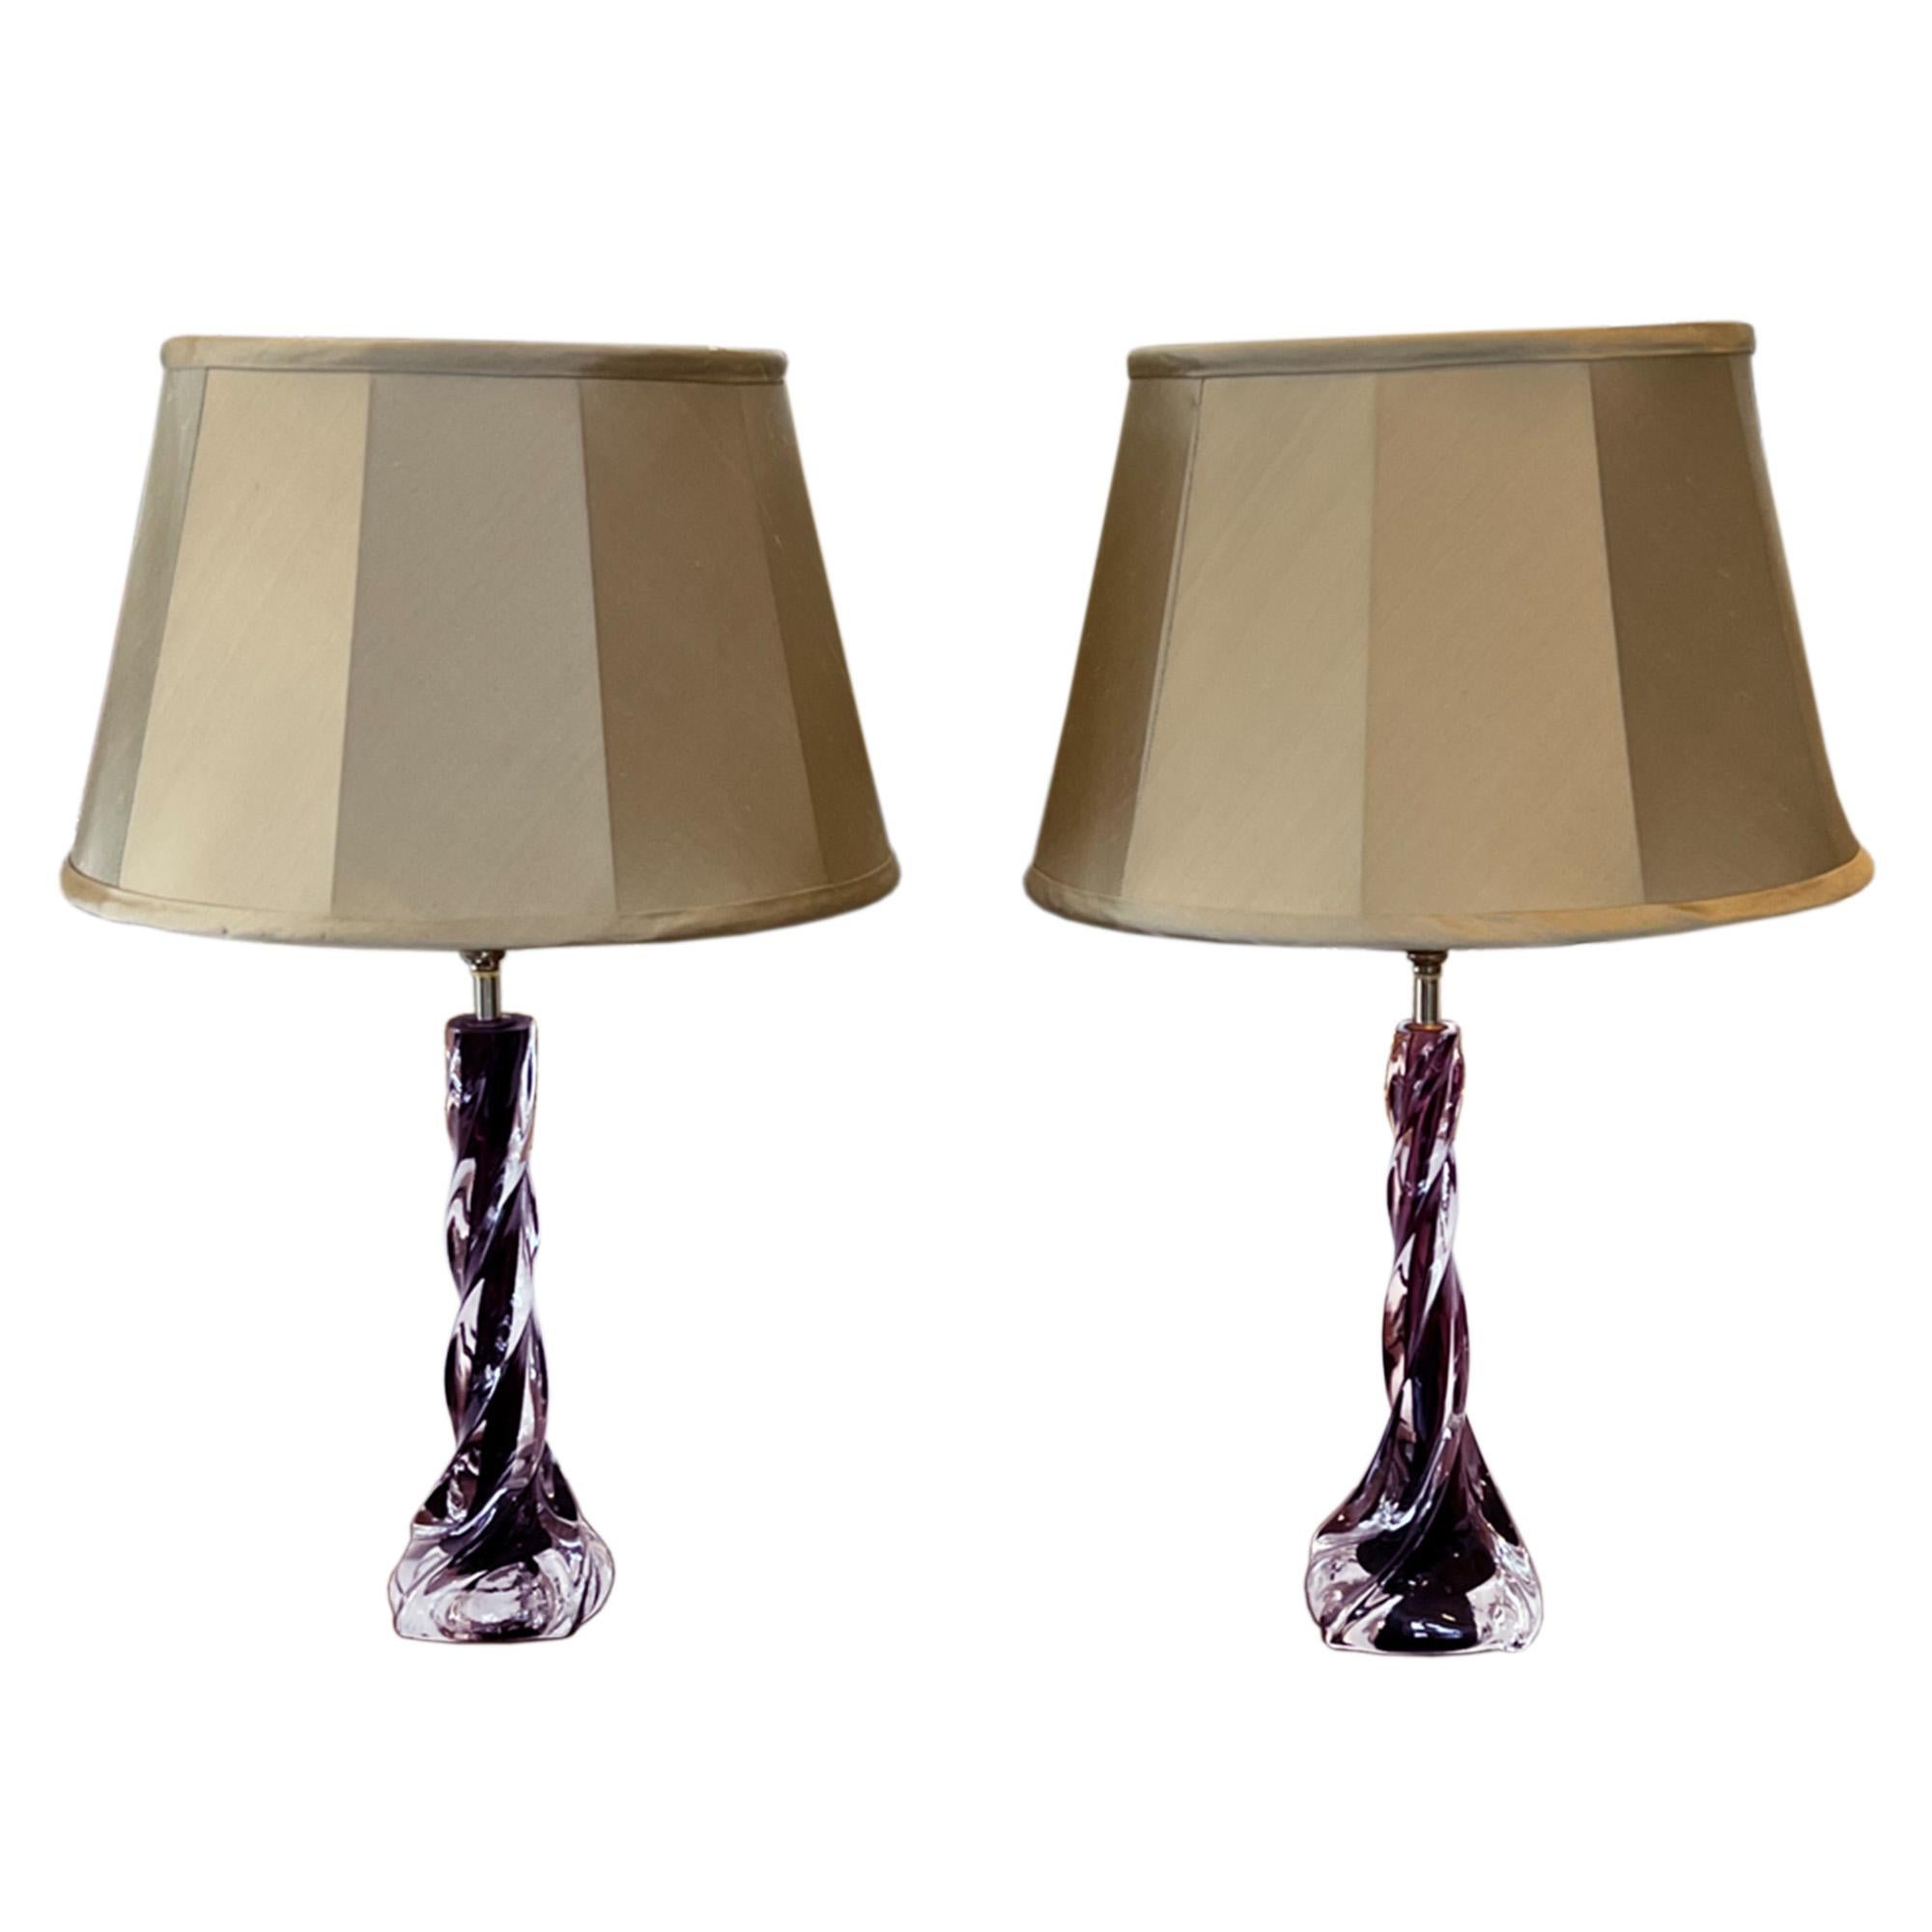 Hand-Crafted Pair of Small Purple Twisted Flygsfors Table Lamps